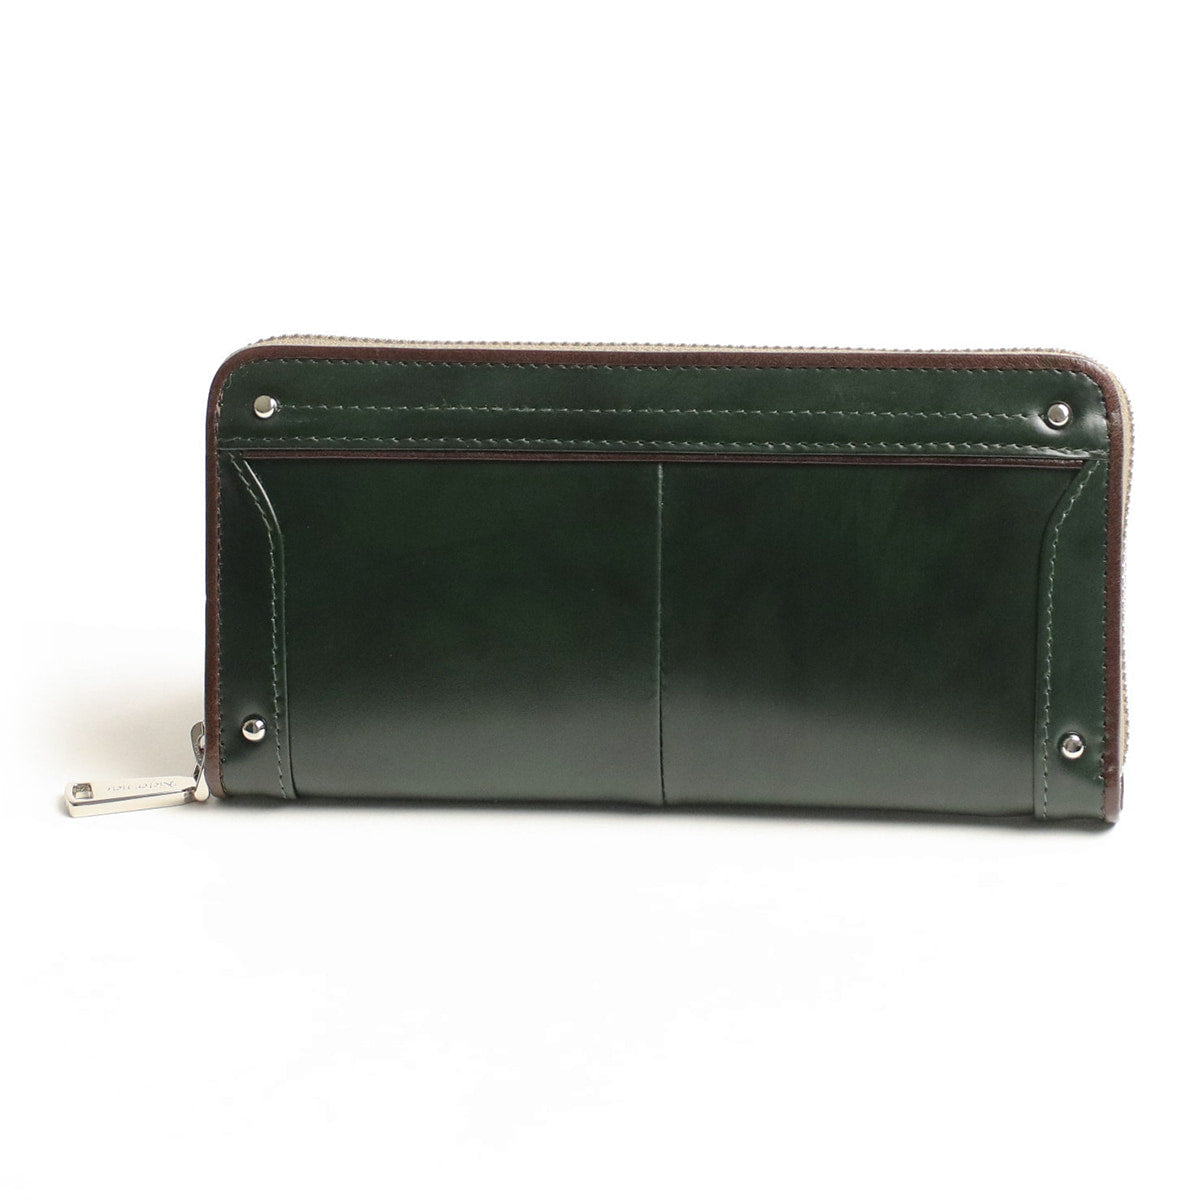 Kiefer neu / Ciao Beautiful uneven dyed leather round zipper long wallet